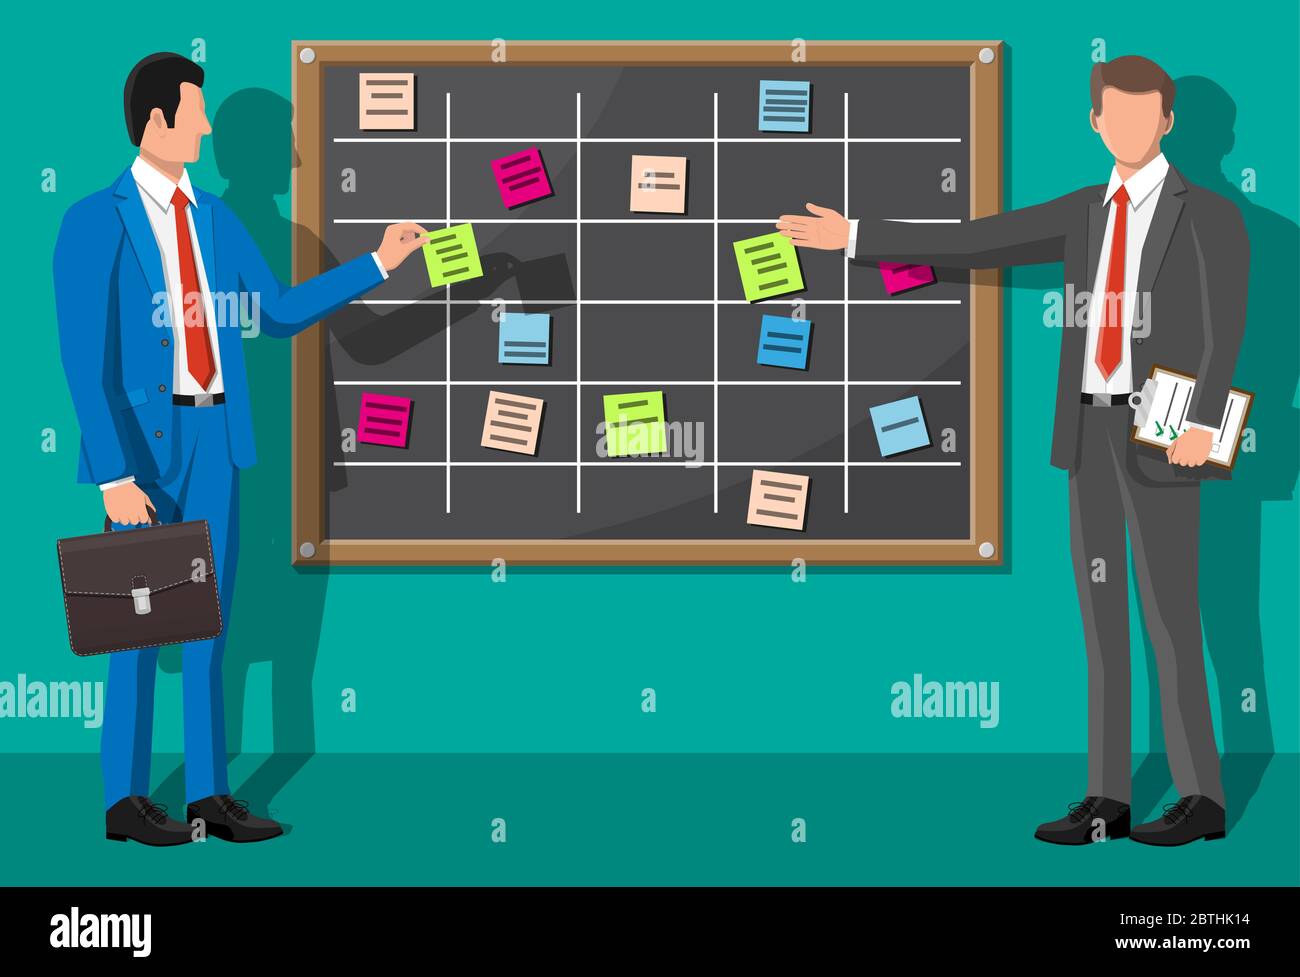 Scrum agile board and businessman. Bulletin board hanging on wall full of  tasks on sticky note cards. List of event for employee. Development, team  work, agenda, to do list. Flat vector illustration